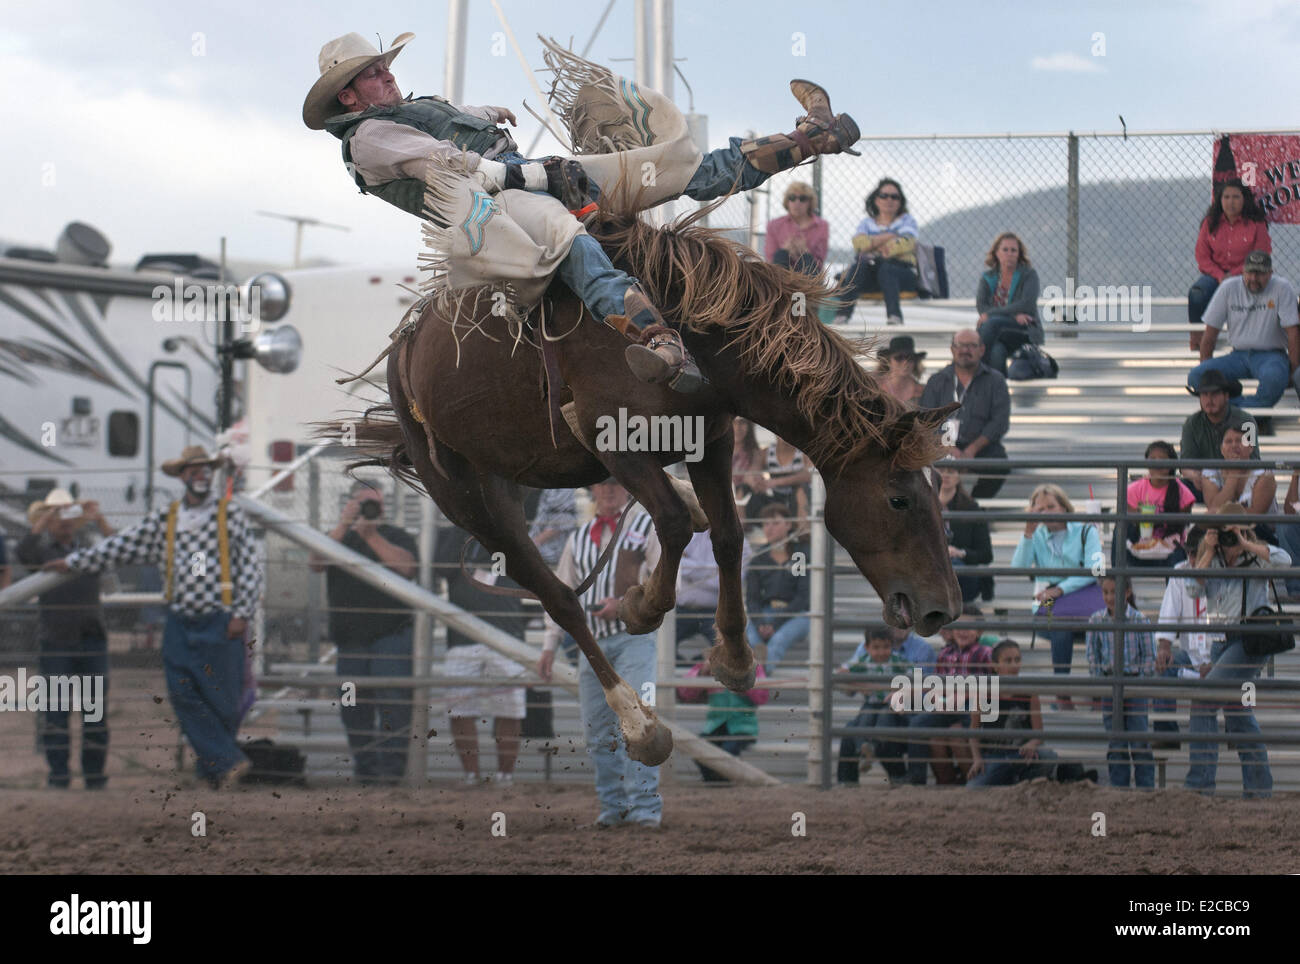 Sante Fe, New Mexico, Santa Fe, New Mexico, US. 18th June, 2014. Jared Green, from Socorro, competes in the bareback riding event on the first night of the Rodeo de Santa Fe. Credit:  Eddie Moore/Albuquerque Journal/ZUMAPRESS.com/Alamy Live News Stock Photo